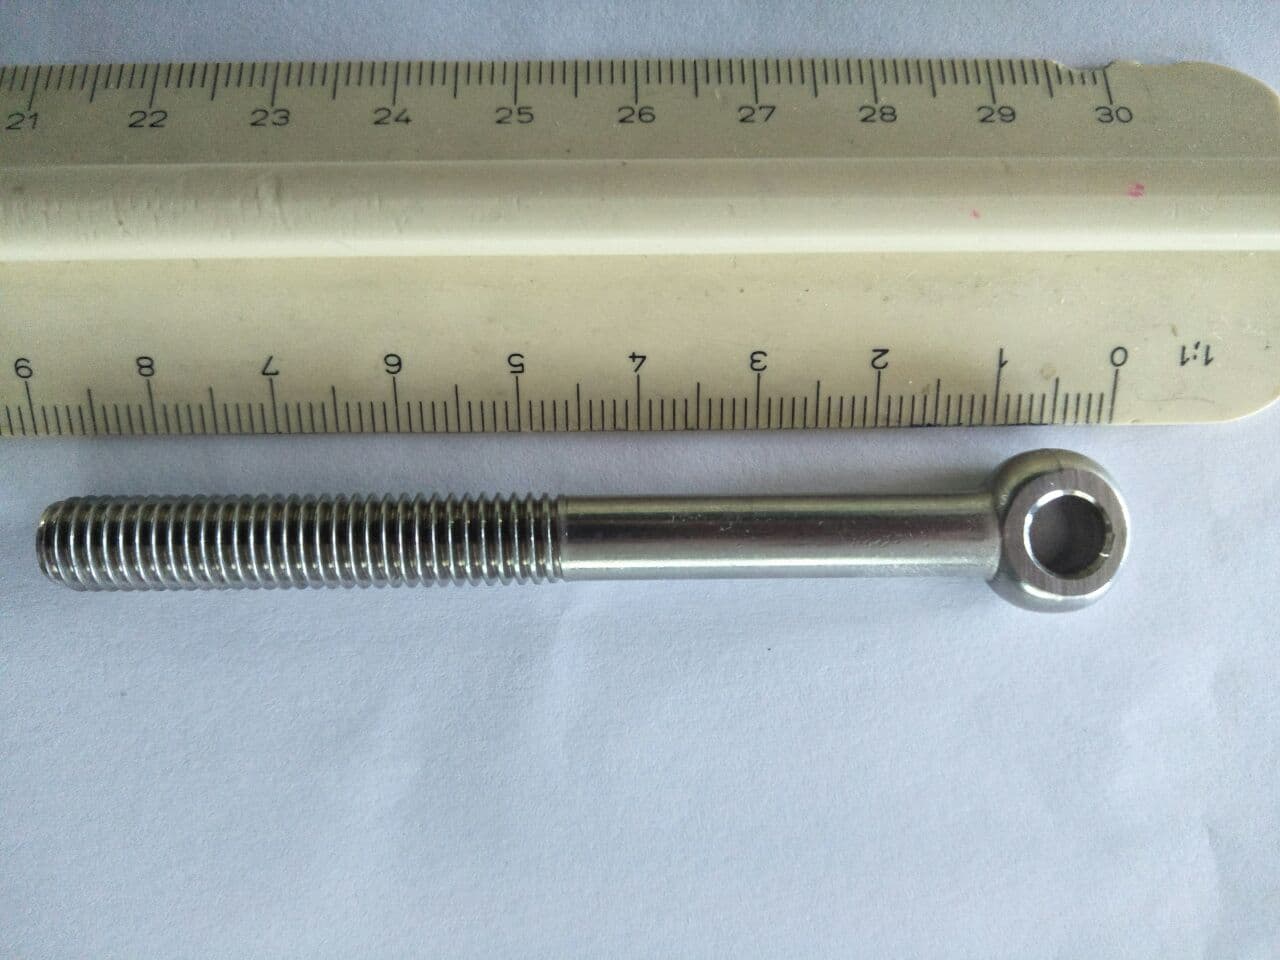 FD 31-44 bolts with M8 thread and nut - stainless steel version